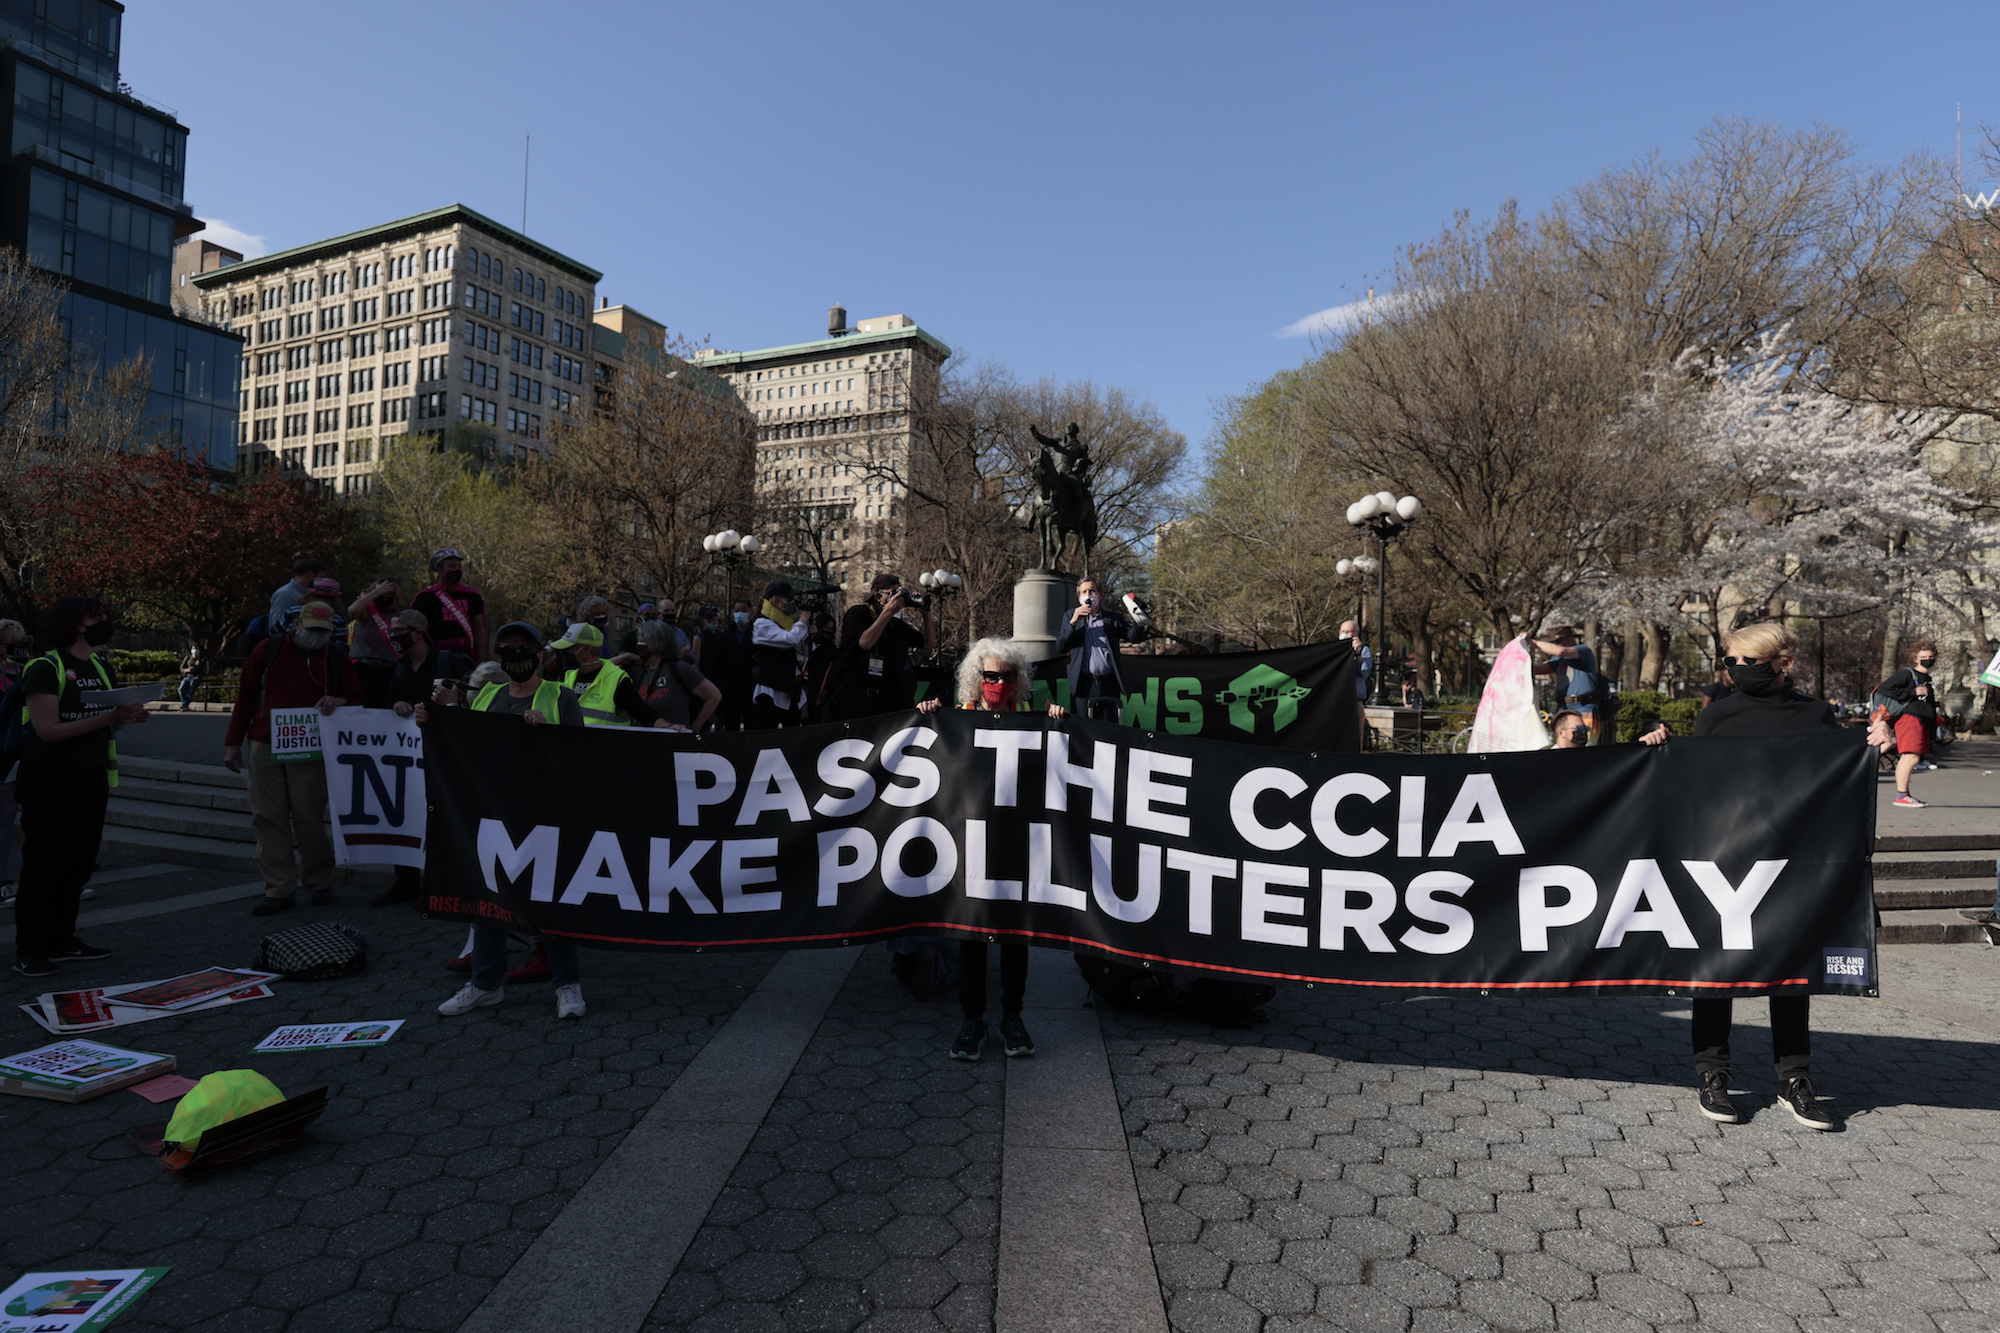 a group of activists carry a large banner with white letters reading "PASS THE CCIA MAKE POLLUTERS PAY"